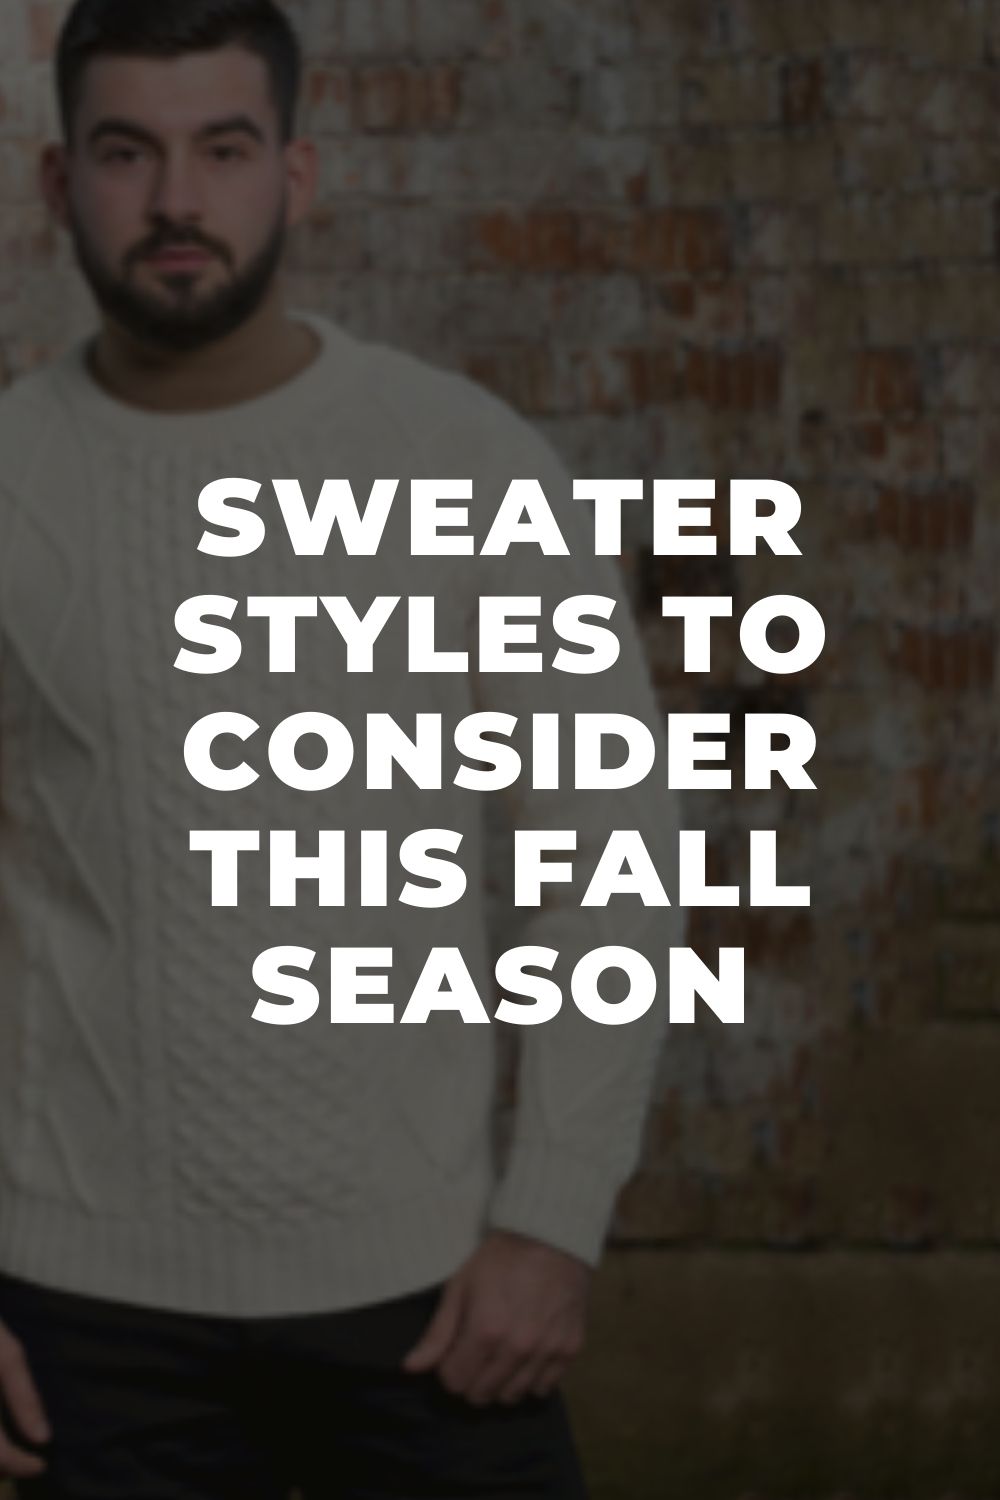 Sweater Styles to Consider This Fall Season